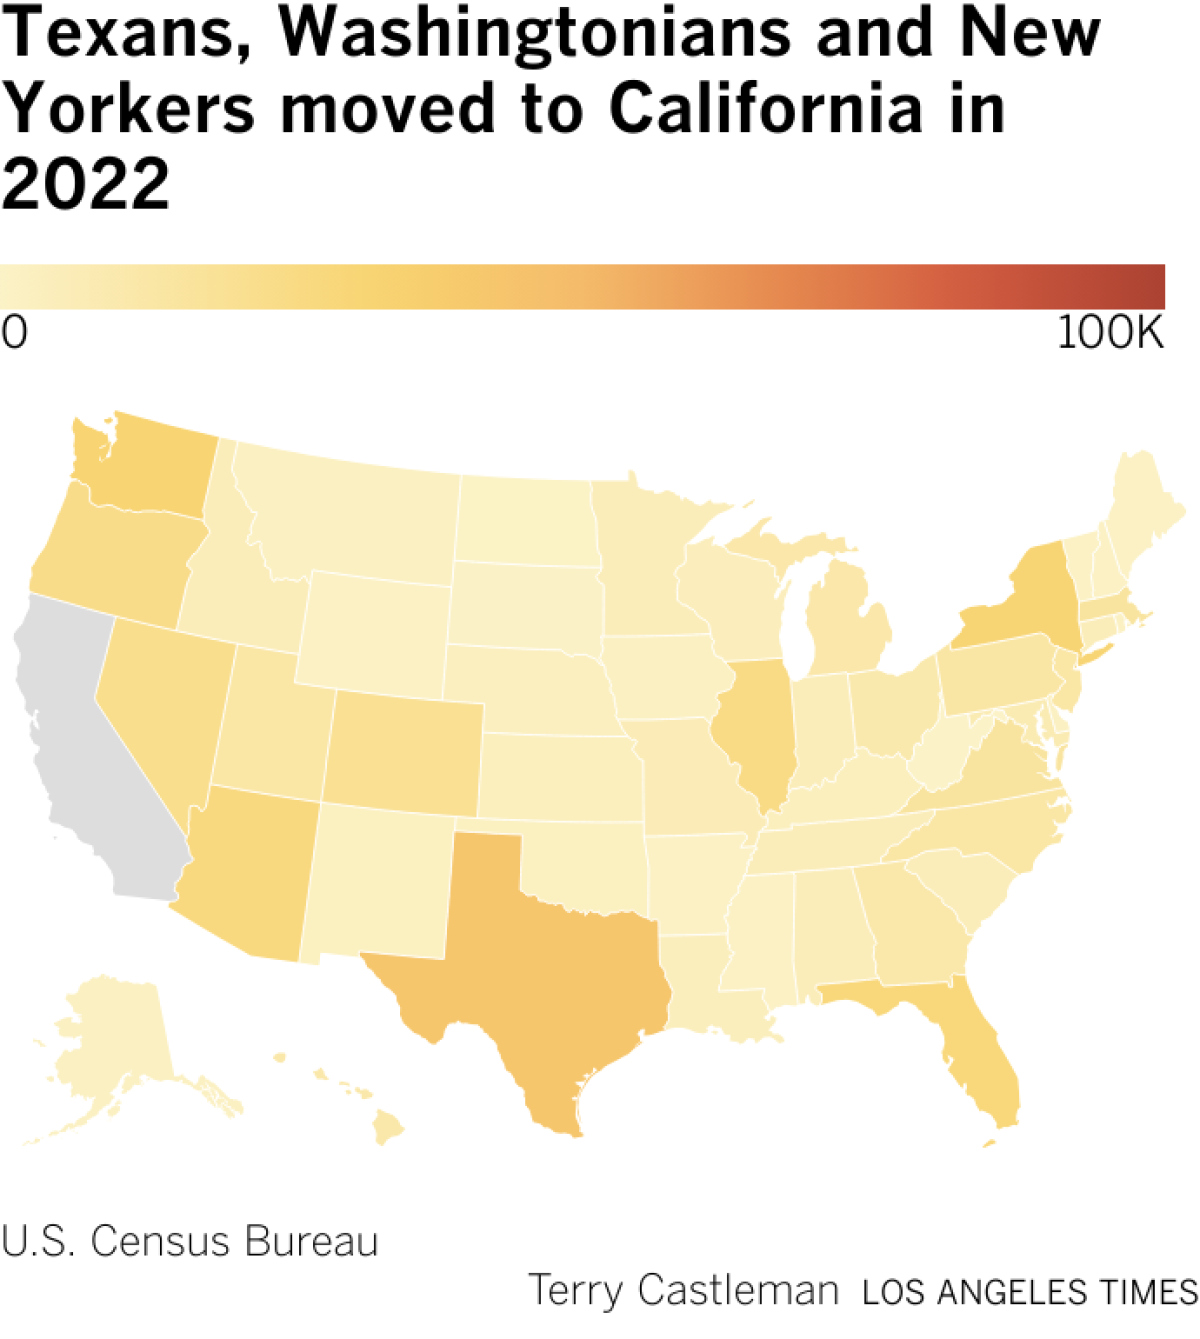 Map showing numbers of people who moved to each U.S. state from California in 2022.